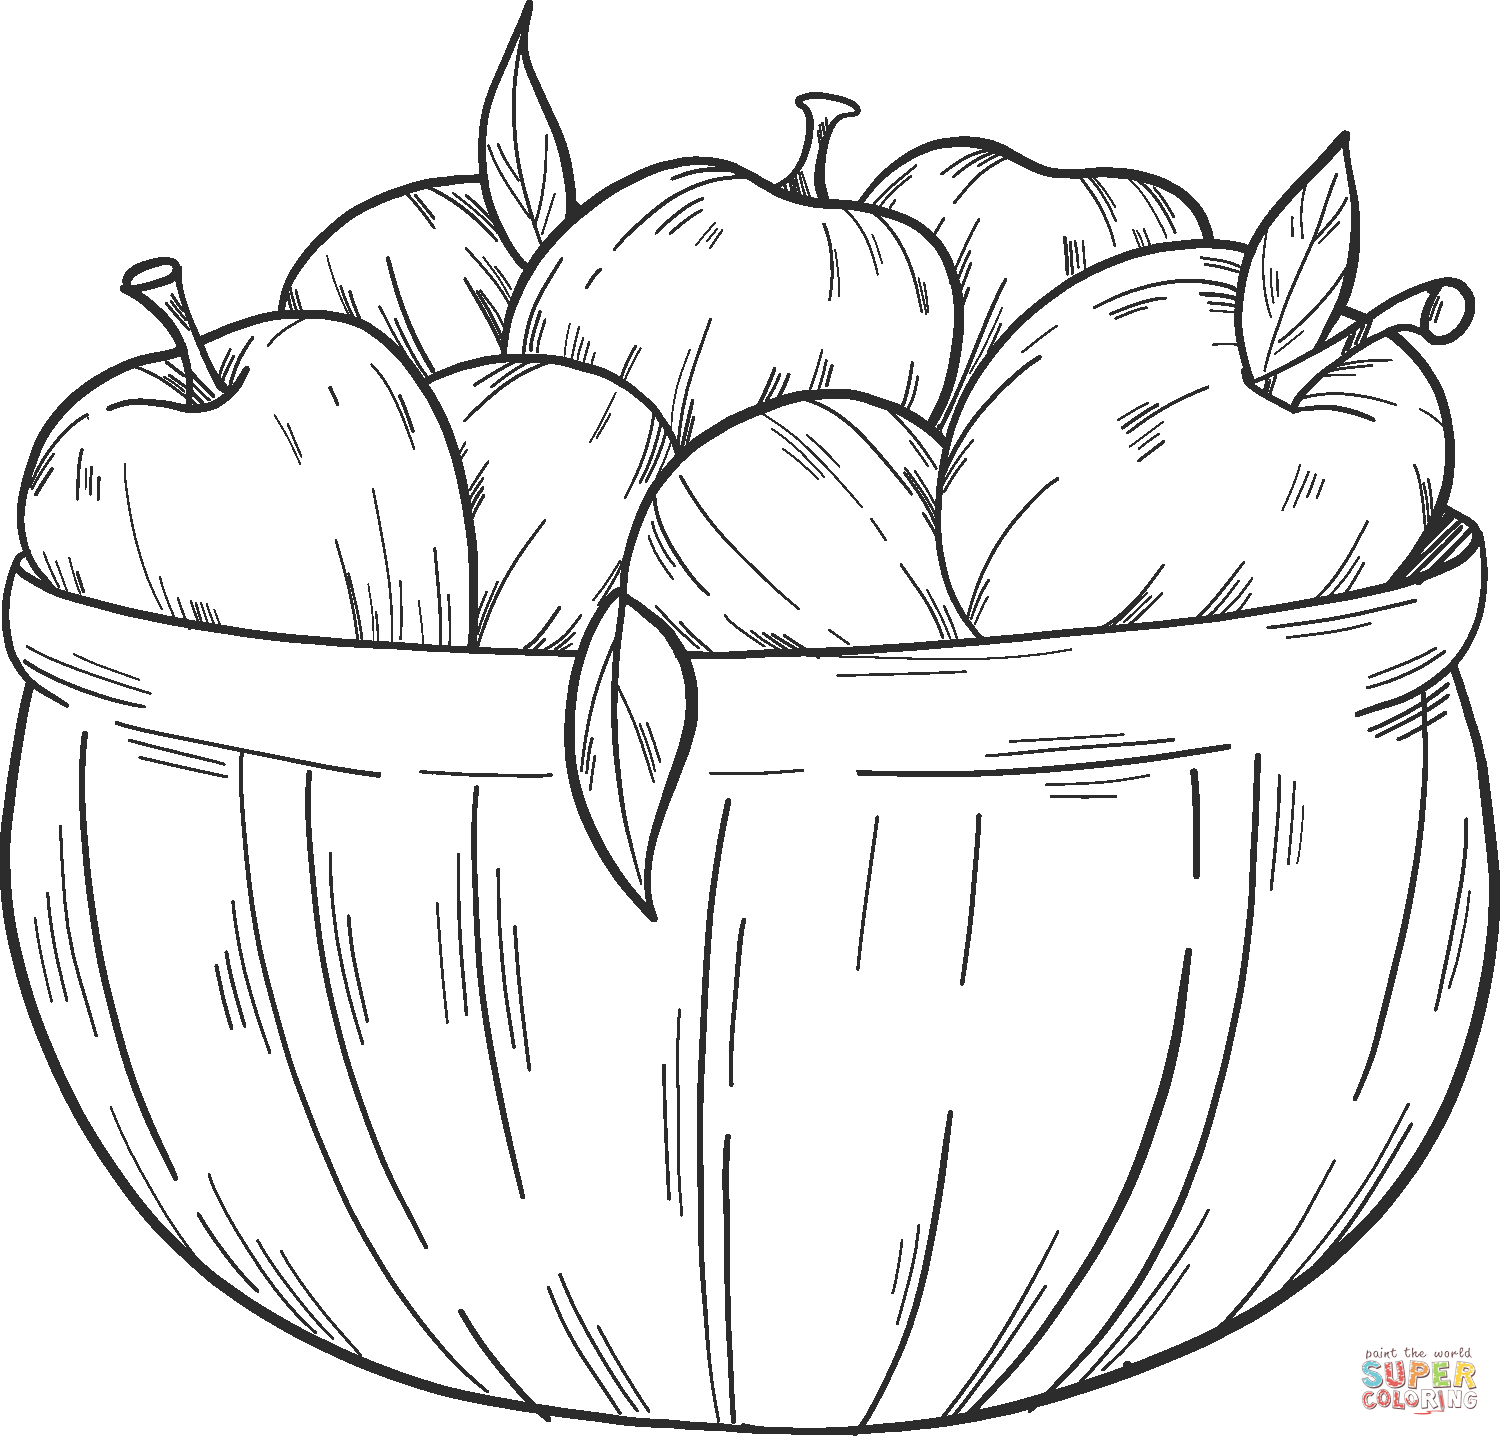 Basket with Apples coloring page | Free Printable Coloring Pages